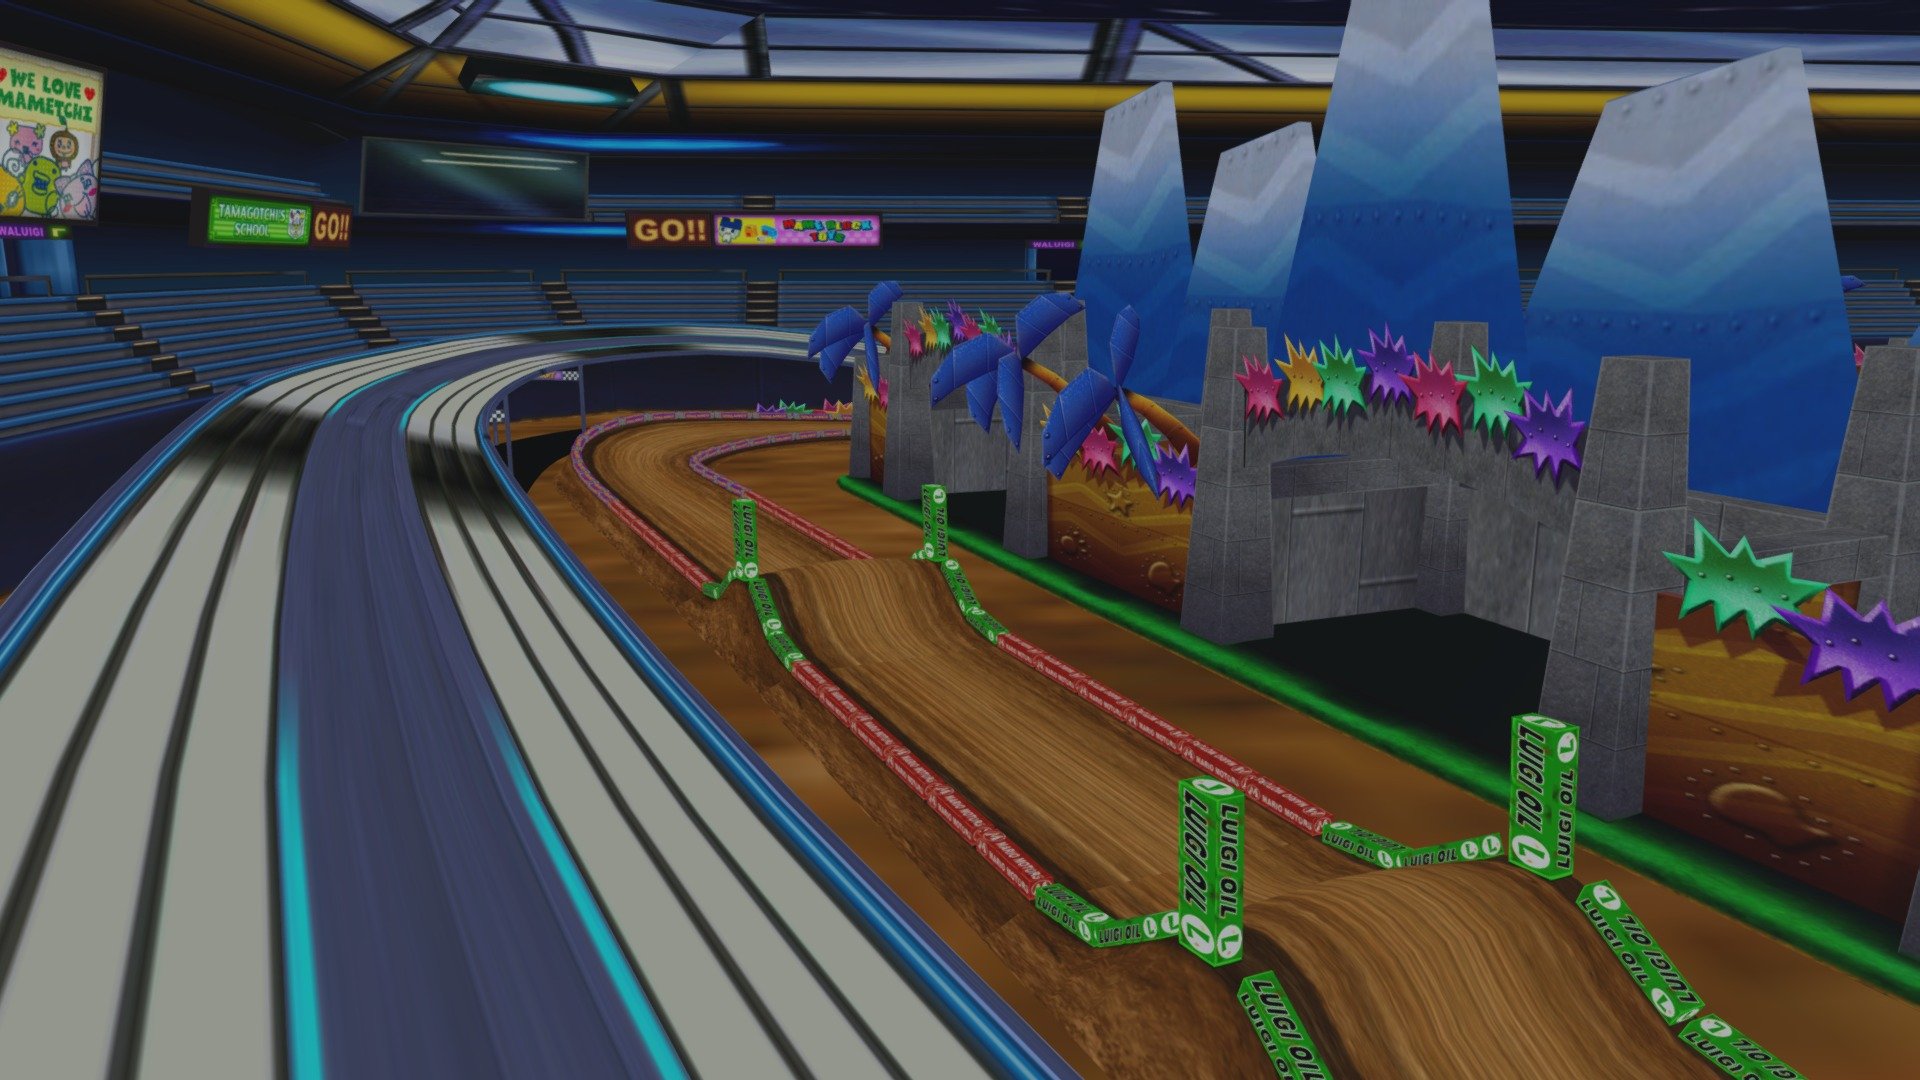 Probably the first mario kart track from the arcade GP series to be uploaded here 3d model